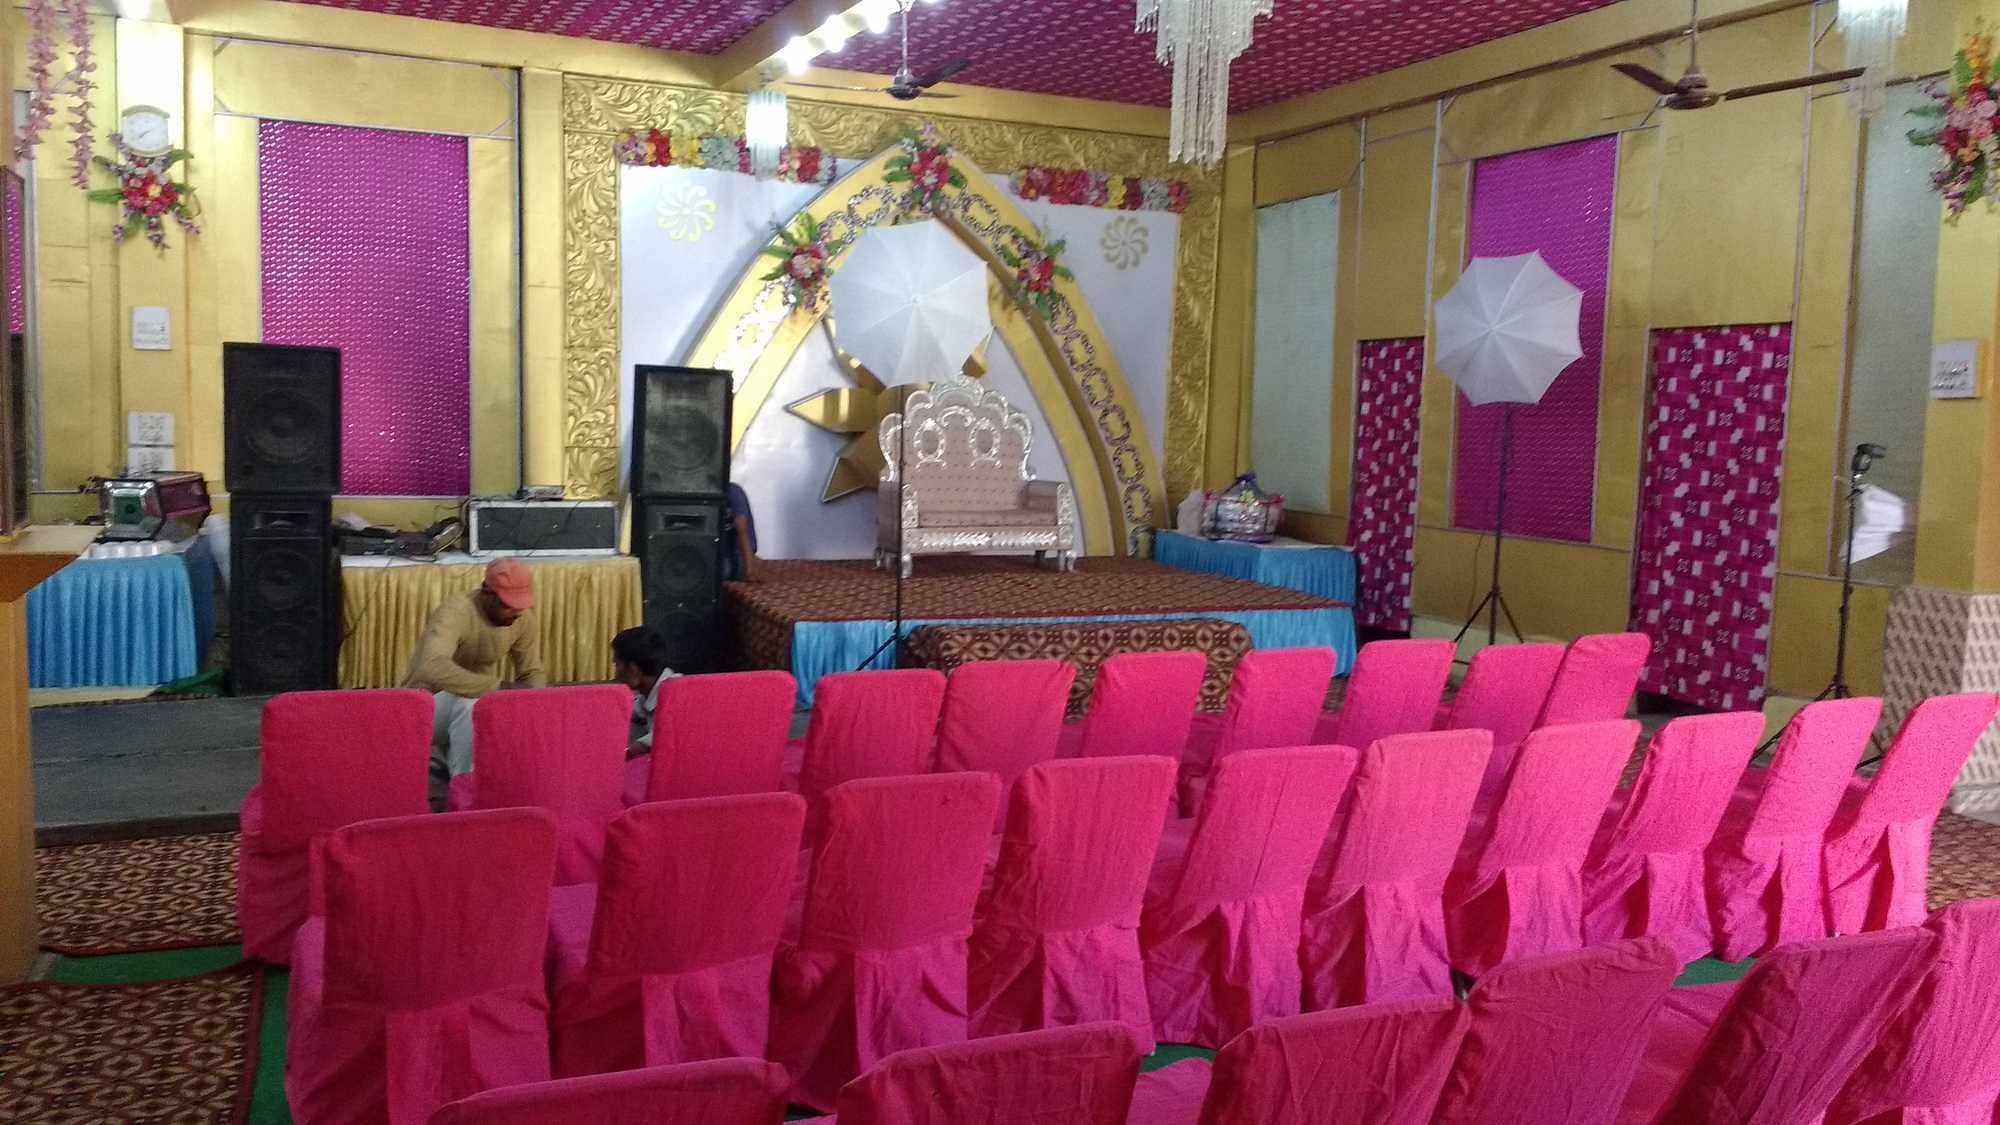 Arpan The Marriage And Party Place in Rajouri Garden, Delhi